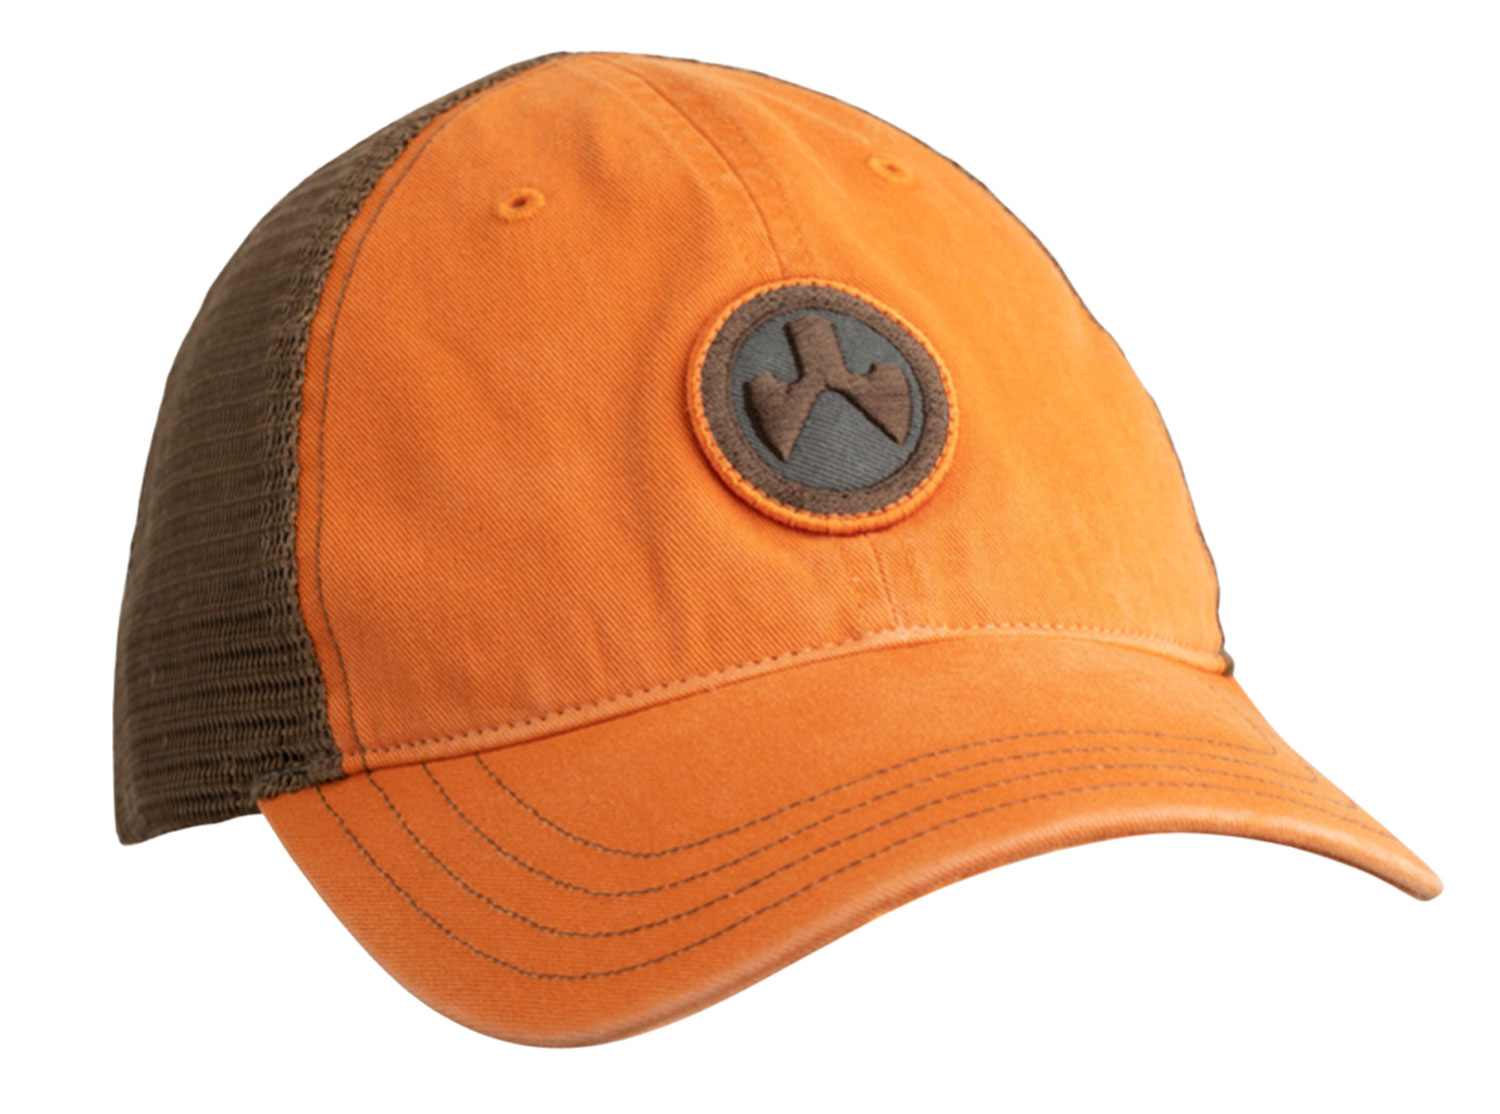 Magpul MAG1105-812 Icon Patch Trucker Hat Orange/Brown Adjustable Snapback OSFA Unstructured